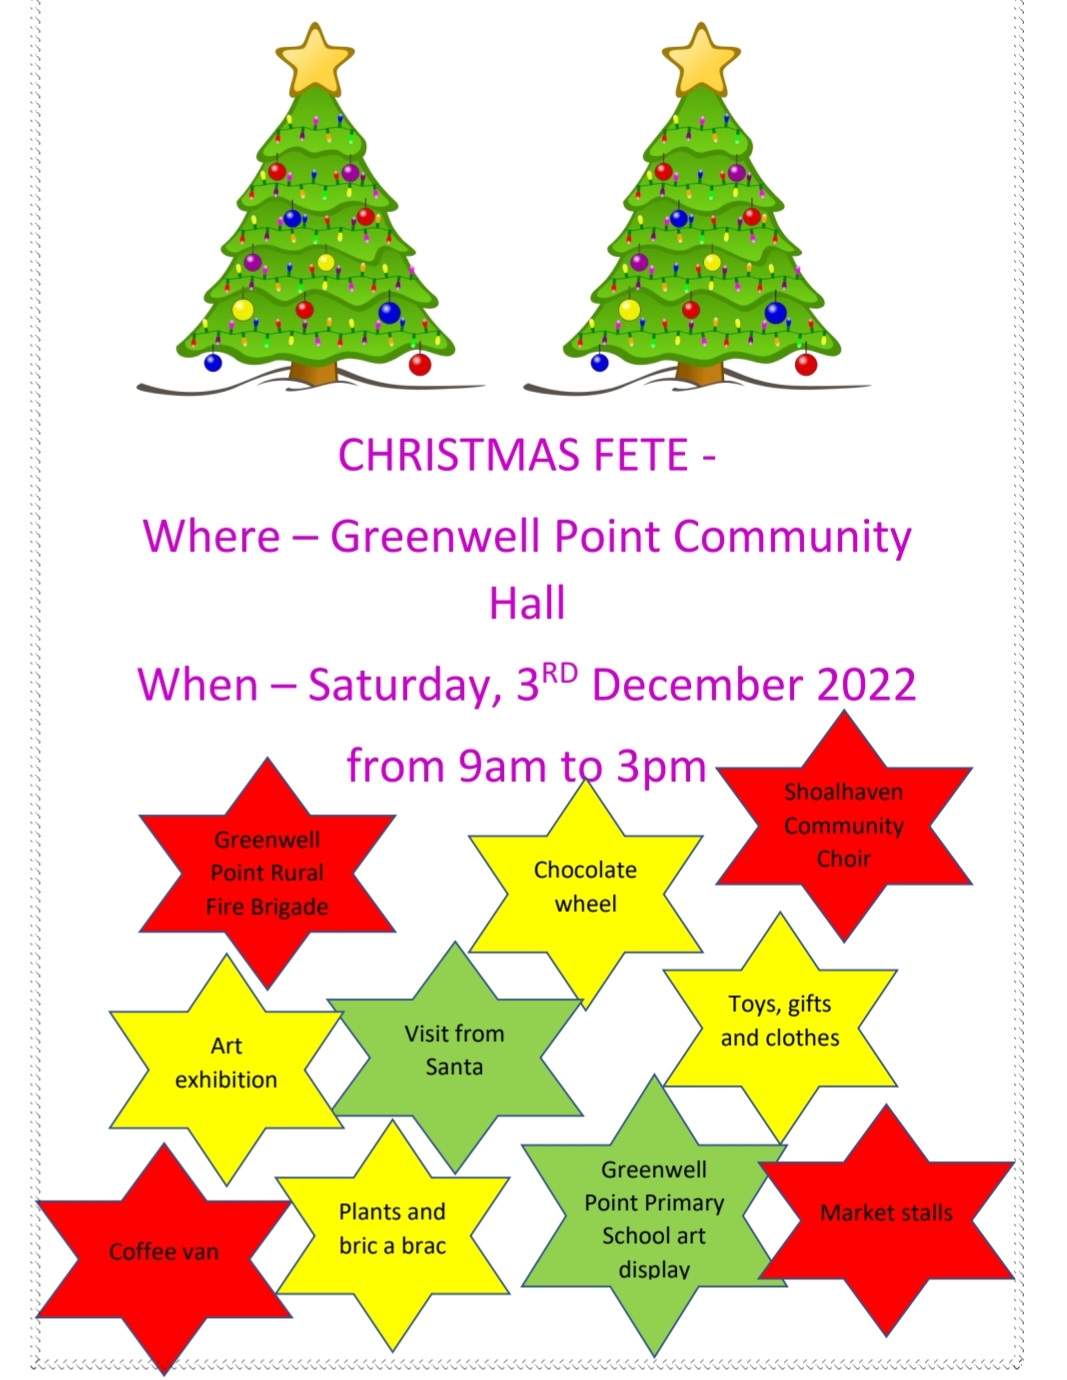 Greenwell Point Christmas Fete